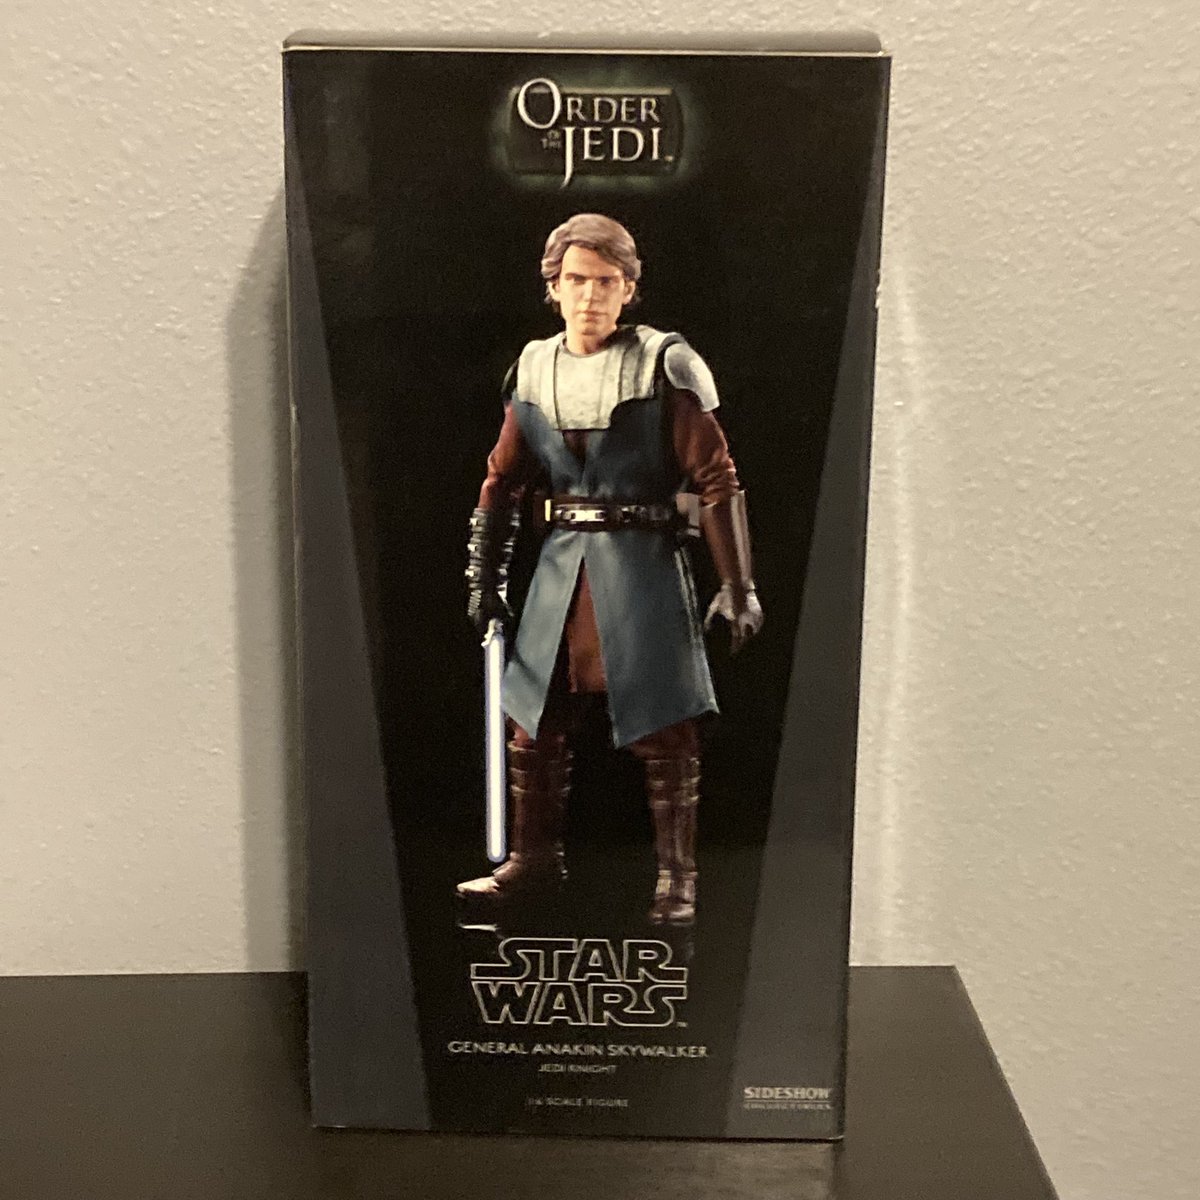 Some more items we’ll be raffling is the Sideshow Collectibles General Anakin Skywalker and a Peter Mayhew signed Chewbacca from @SolRenegade! https://t.co/sYlK998G8Z https://t.co/16v8t1NpDI